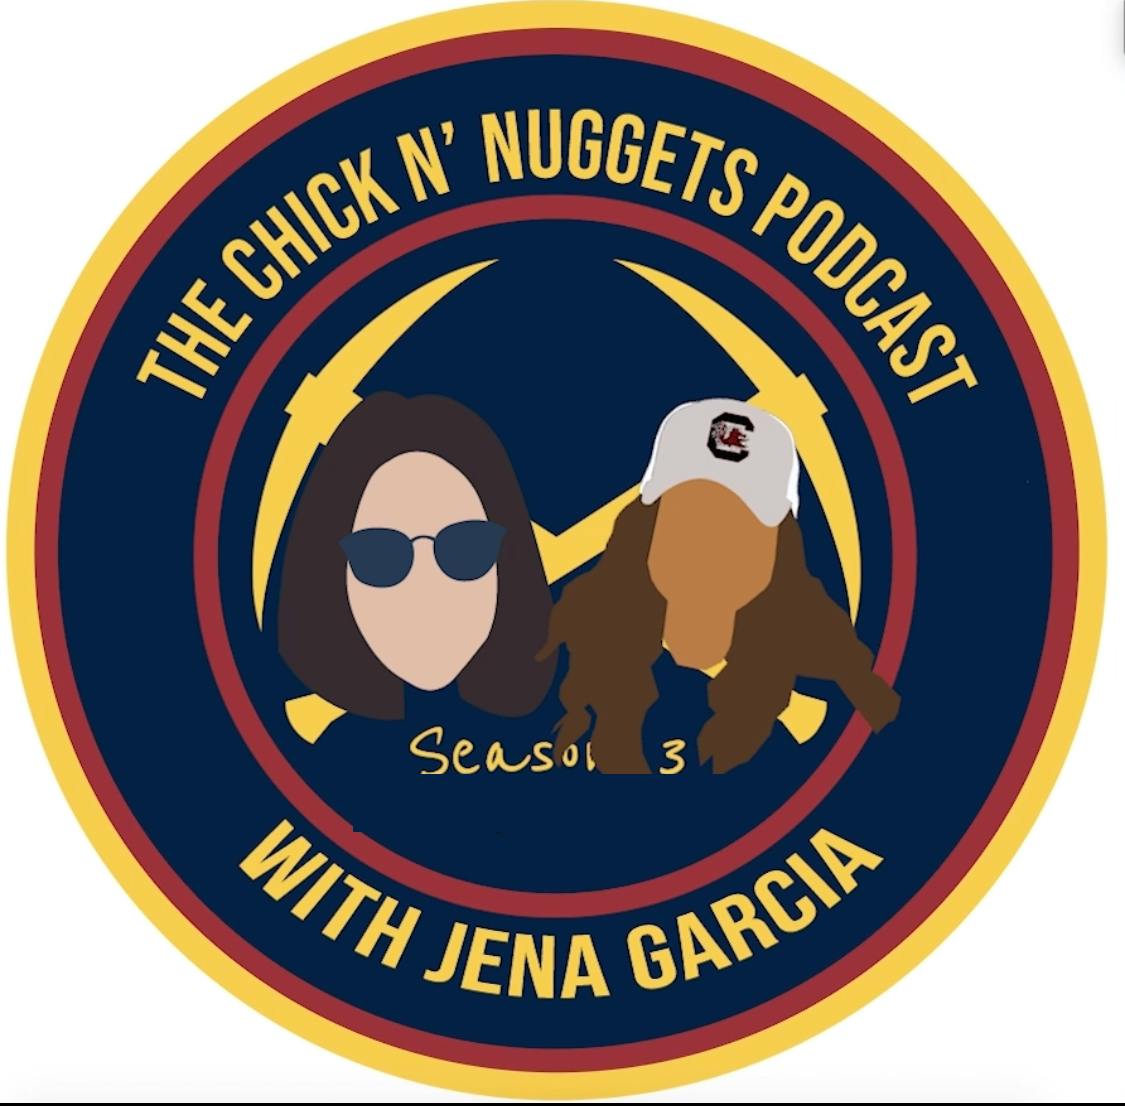 The Chick n' Nuggets Podcast with Jena Garcia: The Denver Nuggets looked Refreshed after the All-Star Break